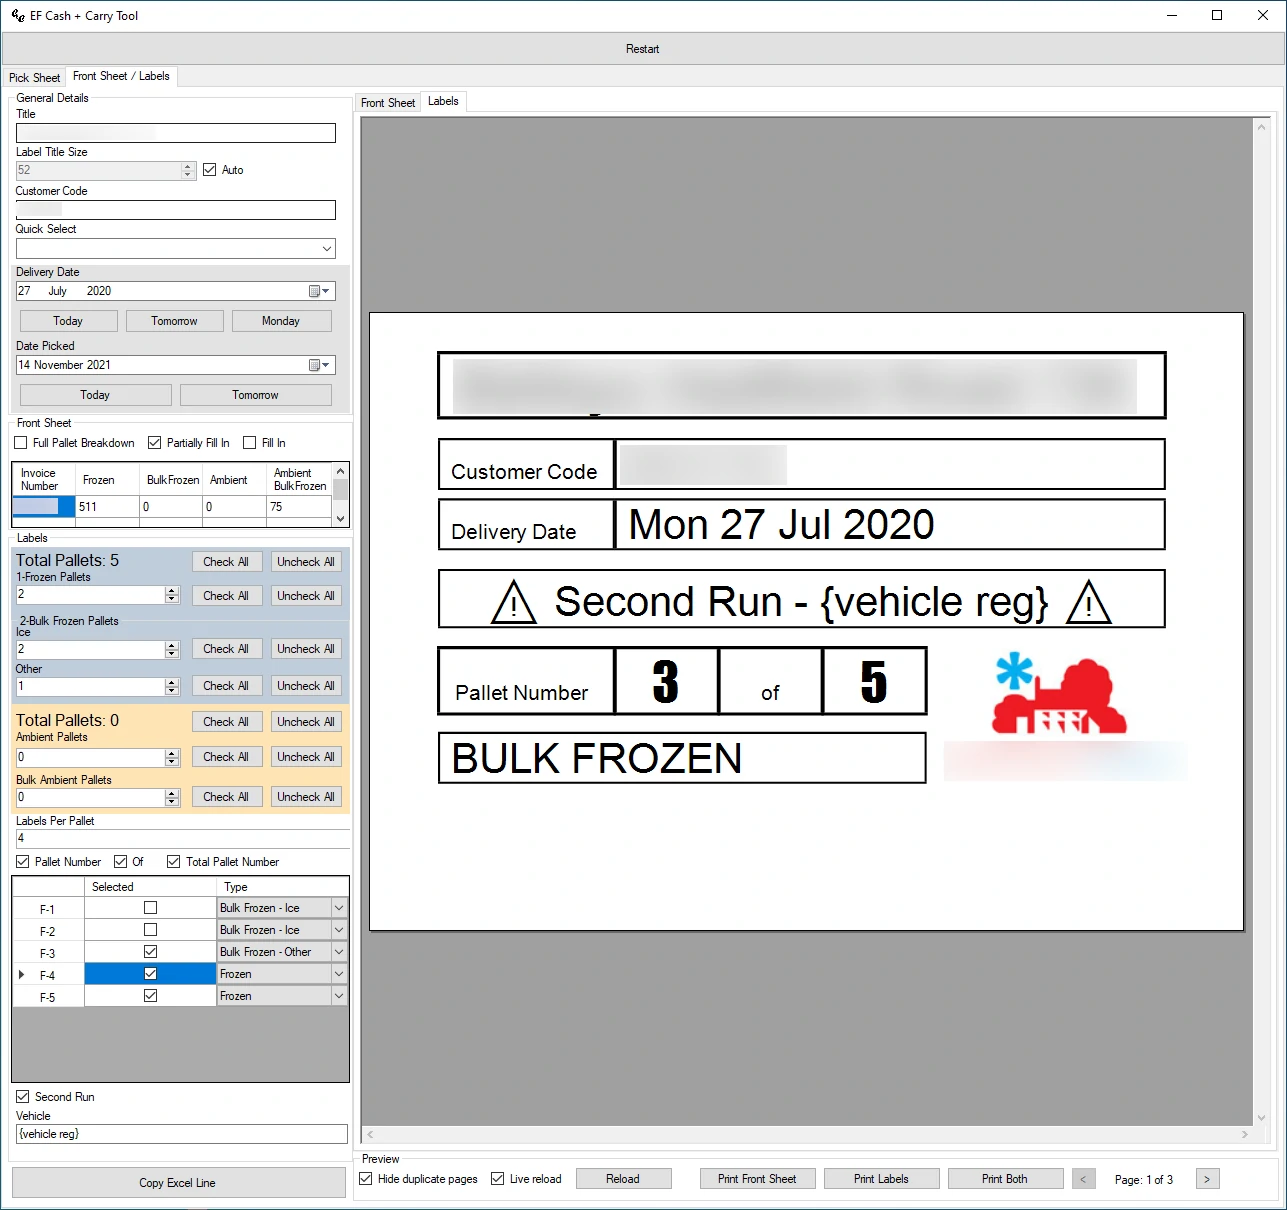 Generating pallet labels using extracted information